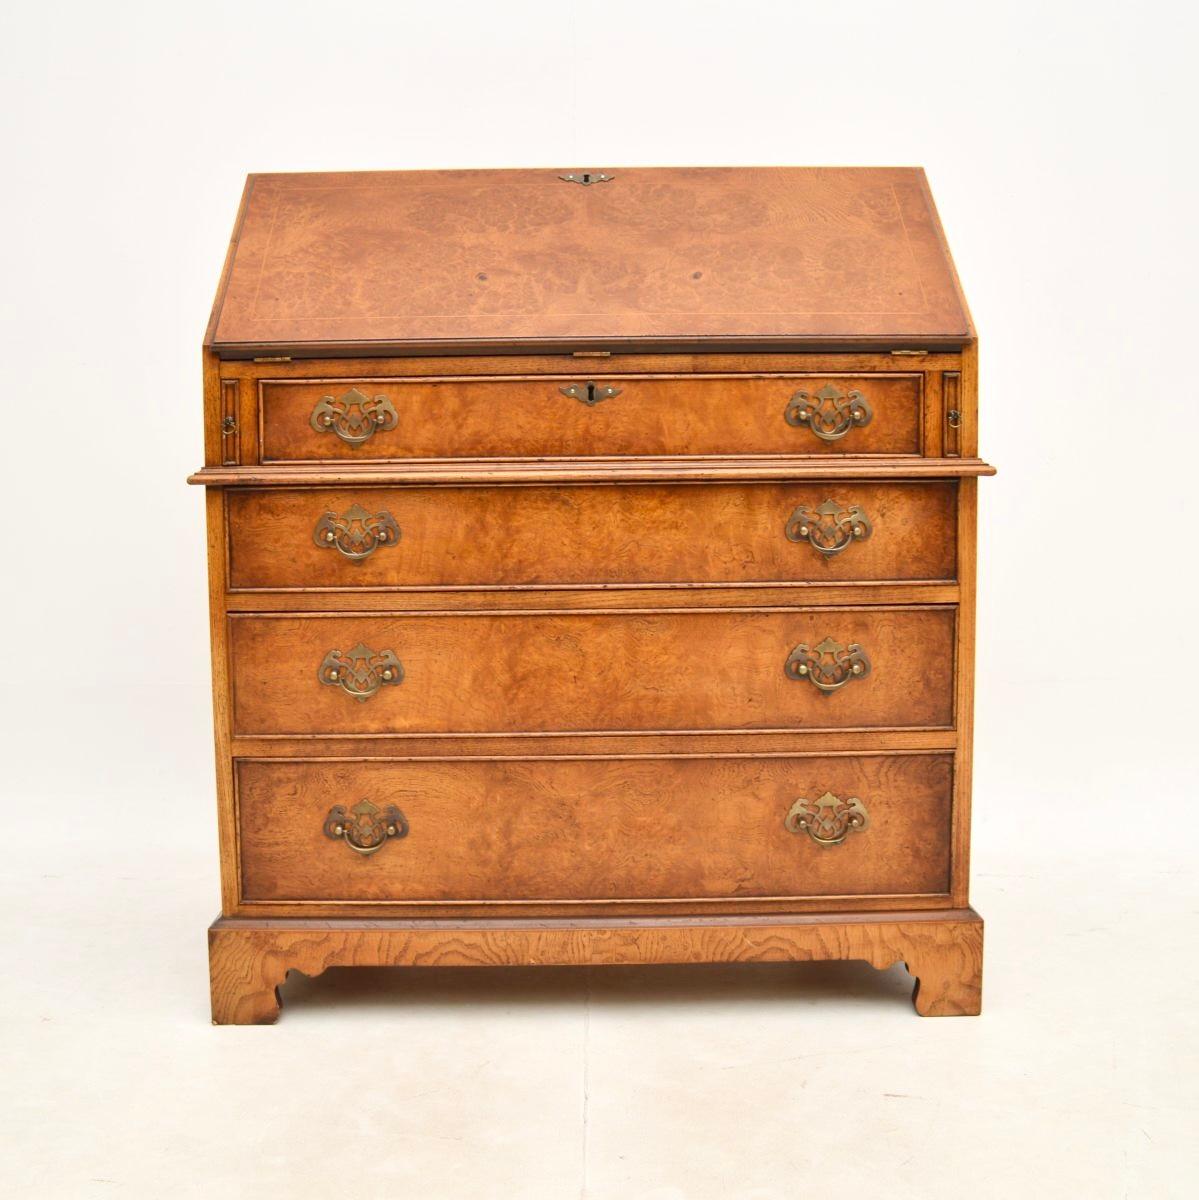 A superb antique Georgian style burr elm writing bureau. This was made in England, it dates from around the 1930’s.

The quality is outstanding, this is a great size with lots of work space and storage space in the drawers below. The burr elm grain